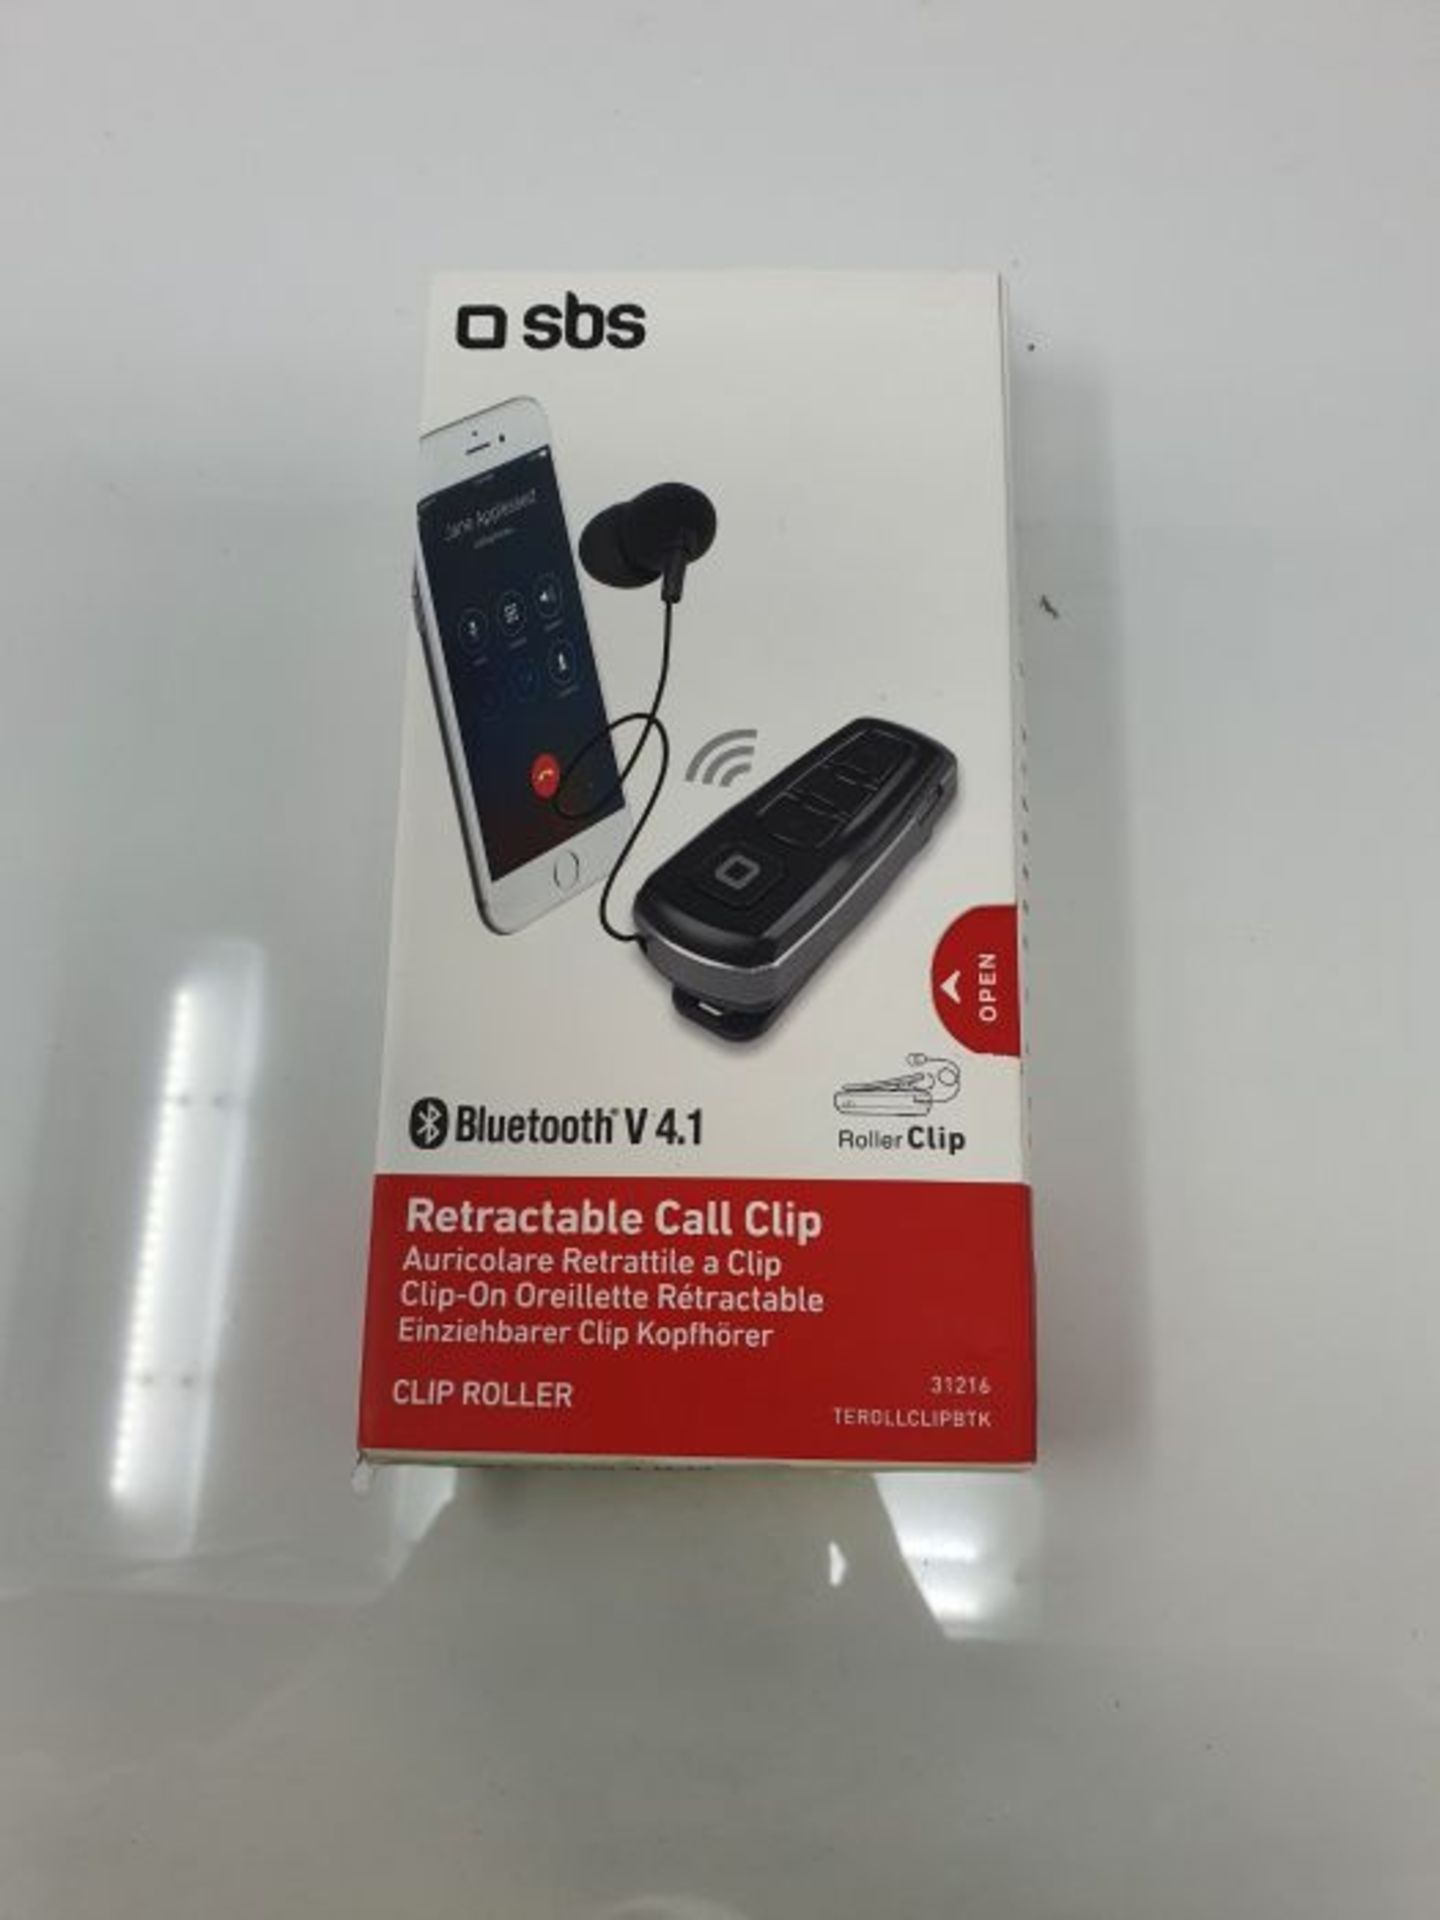 SBS Bluetooth Headset with Clip and Roll-up Wire Multipoint Technology to connect 2 de - Image 2 of 3